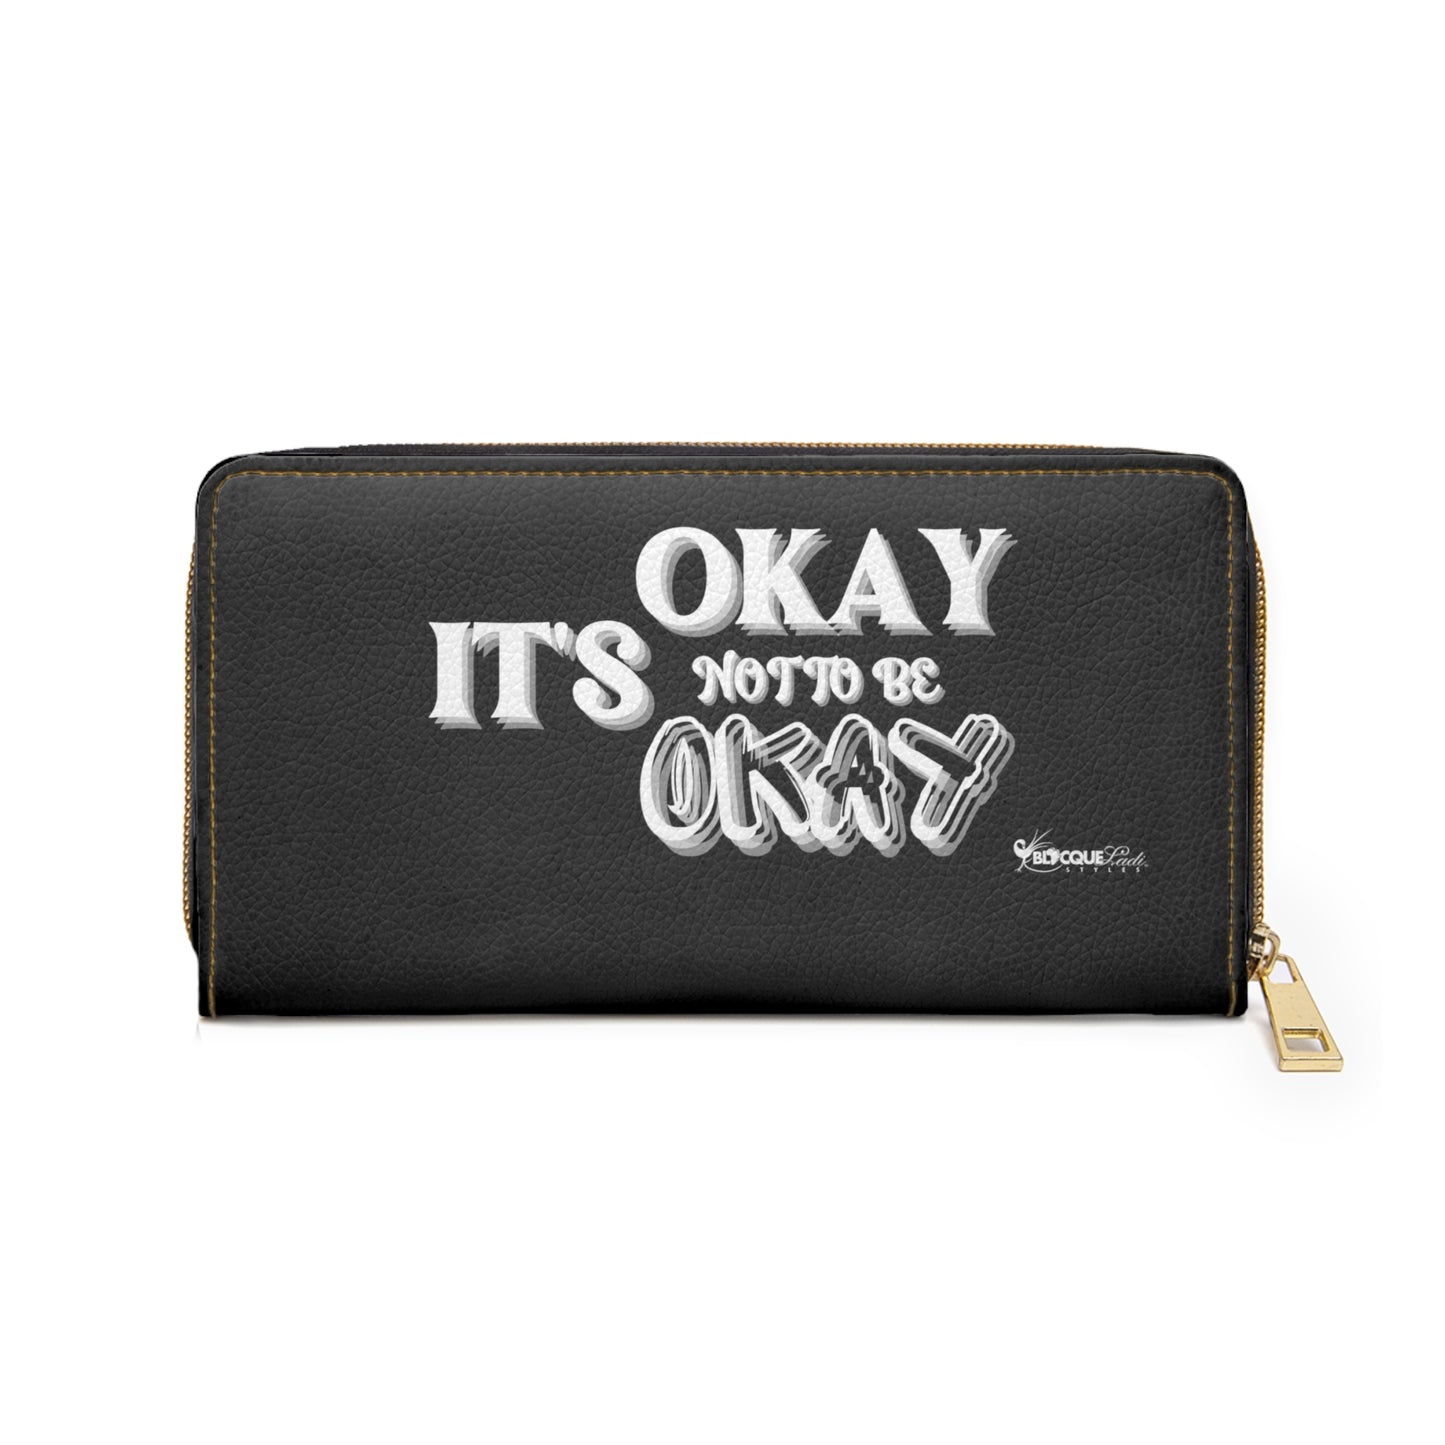 IT’S OKAY, NOT TO BE OKAY- Positive Afrocentric Affirmation Vegan Leather Wallet Bag- Empower Your Style and Self-Love; Black Wallet